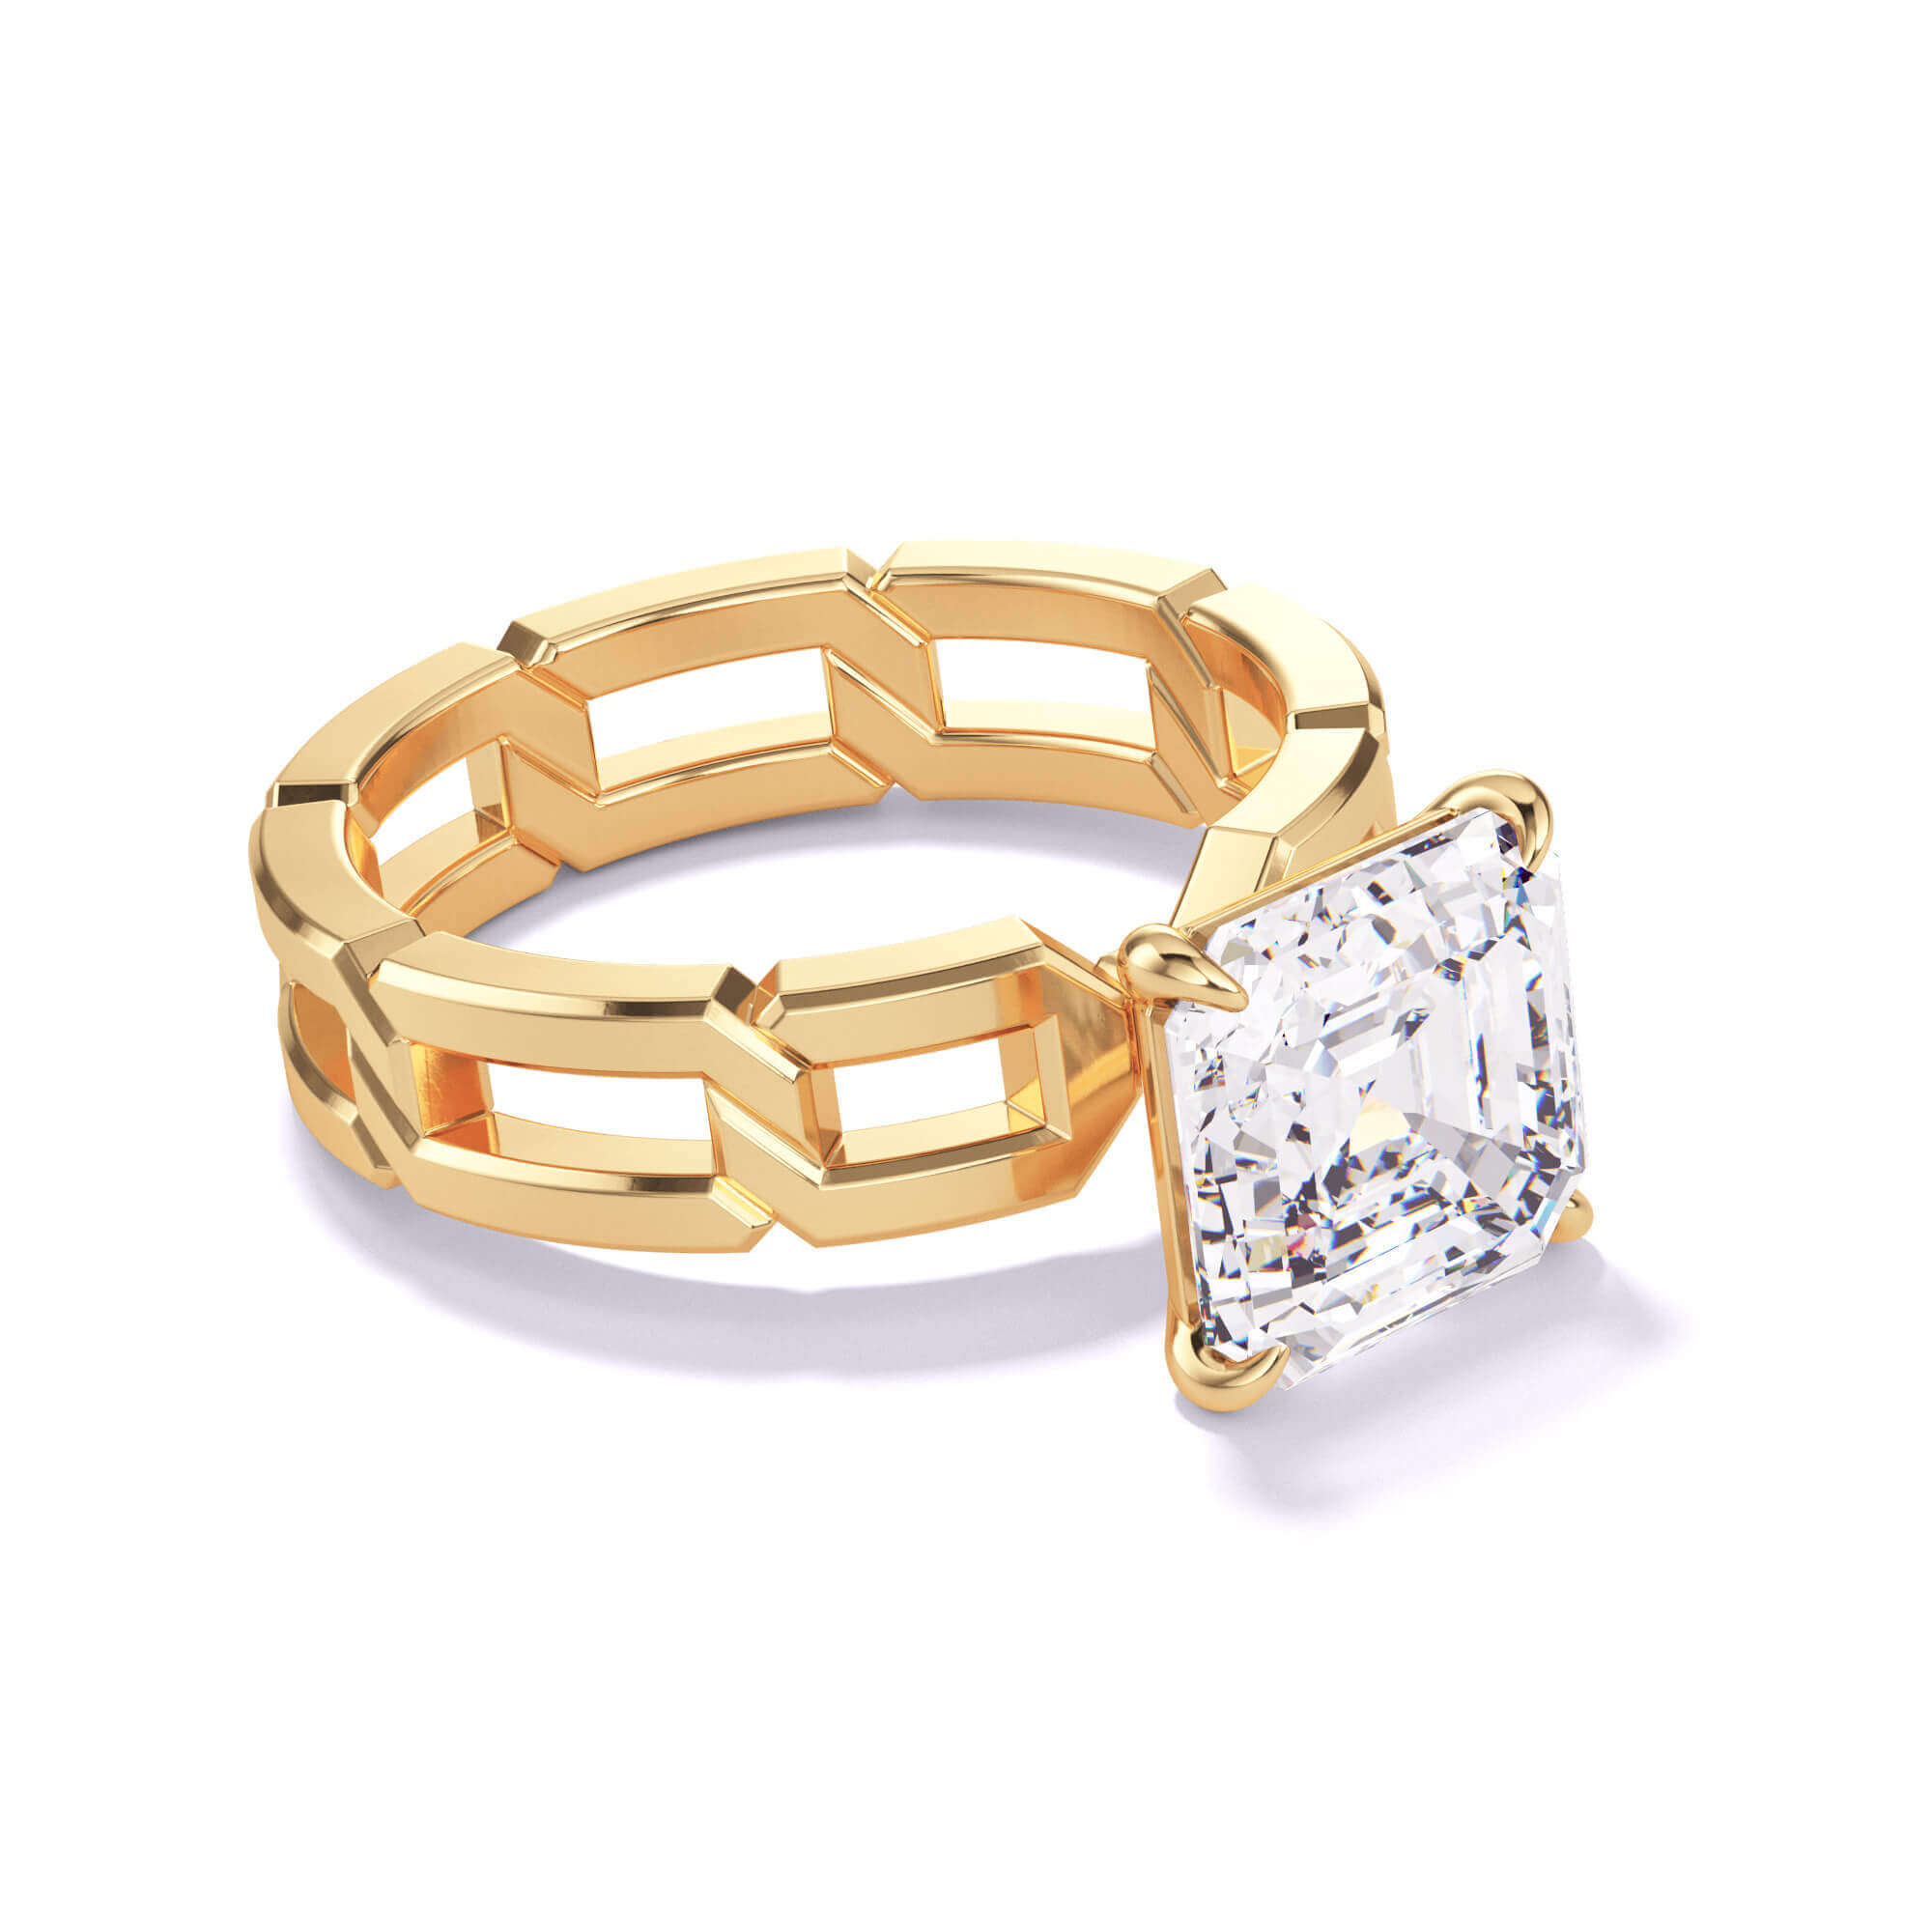 classic engagement ring style yellow gold solitaire